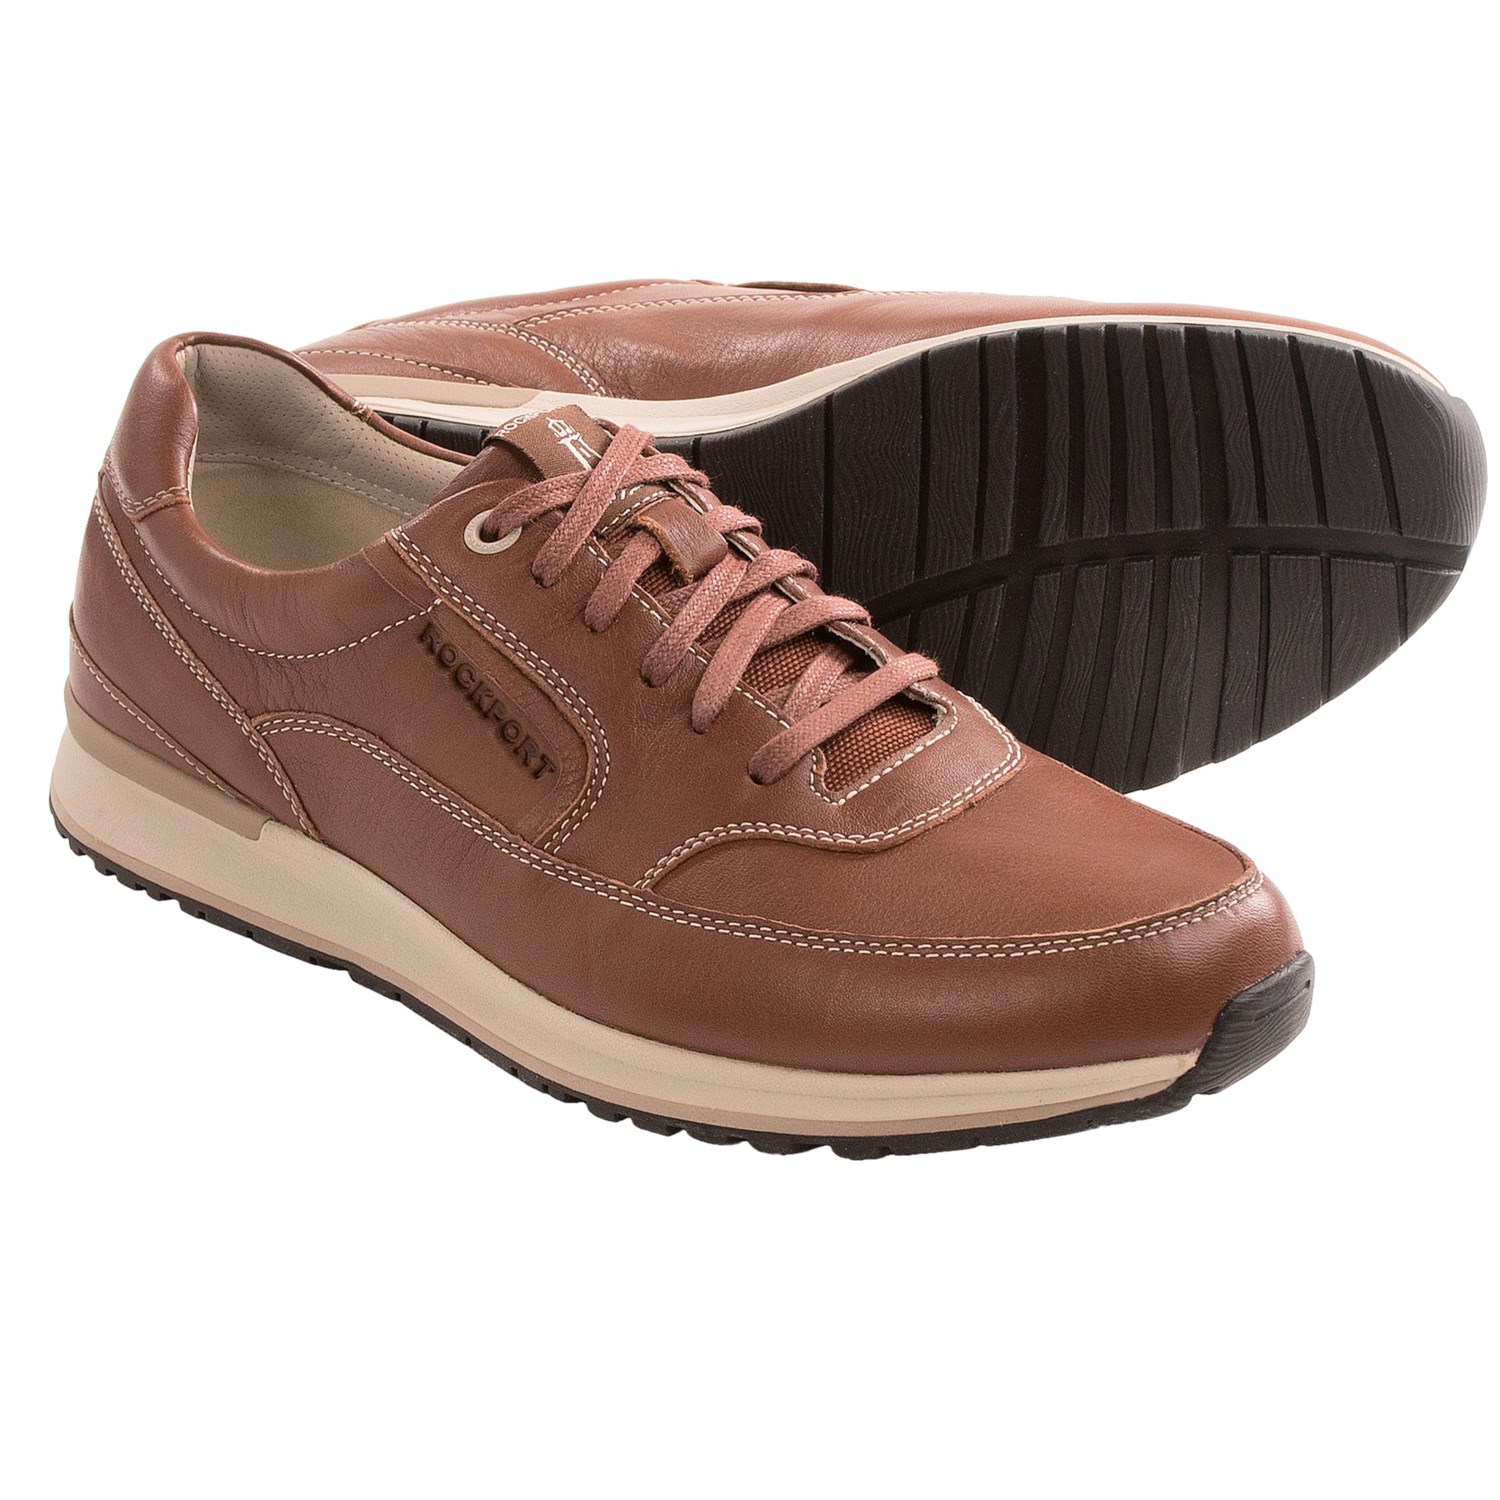 Rockport Mudguard Oxford Shoes (For Men) in British Tan